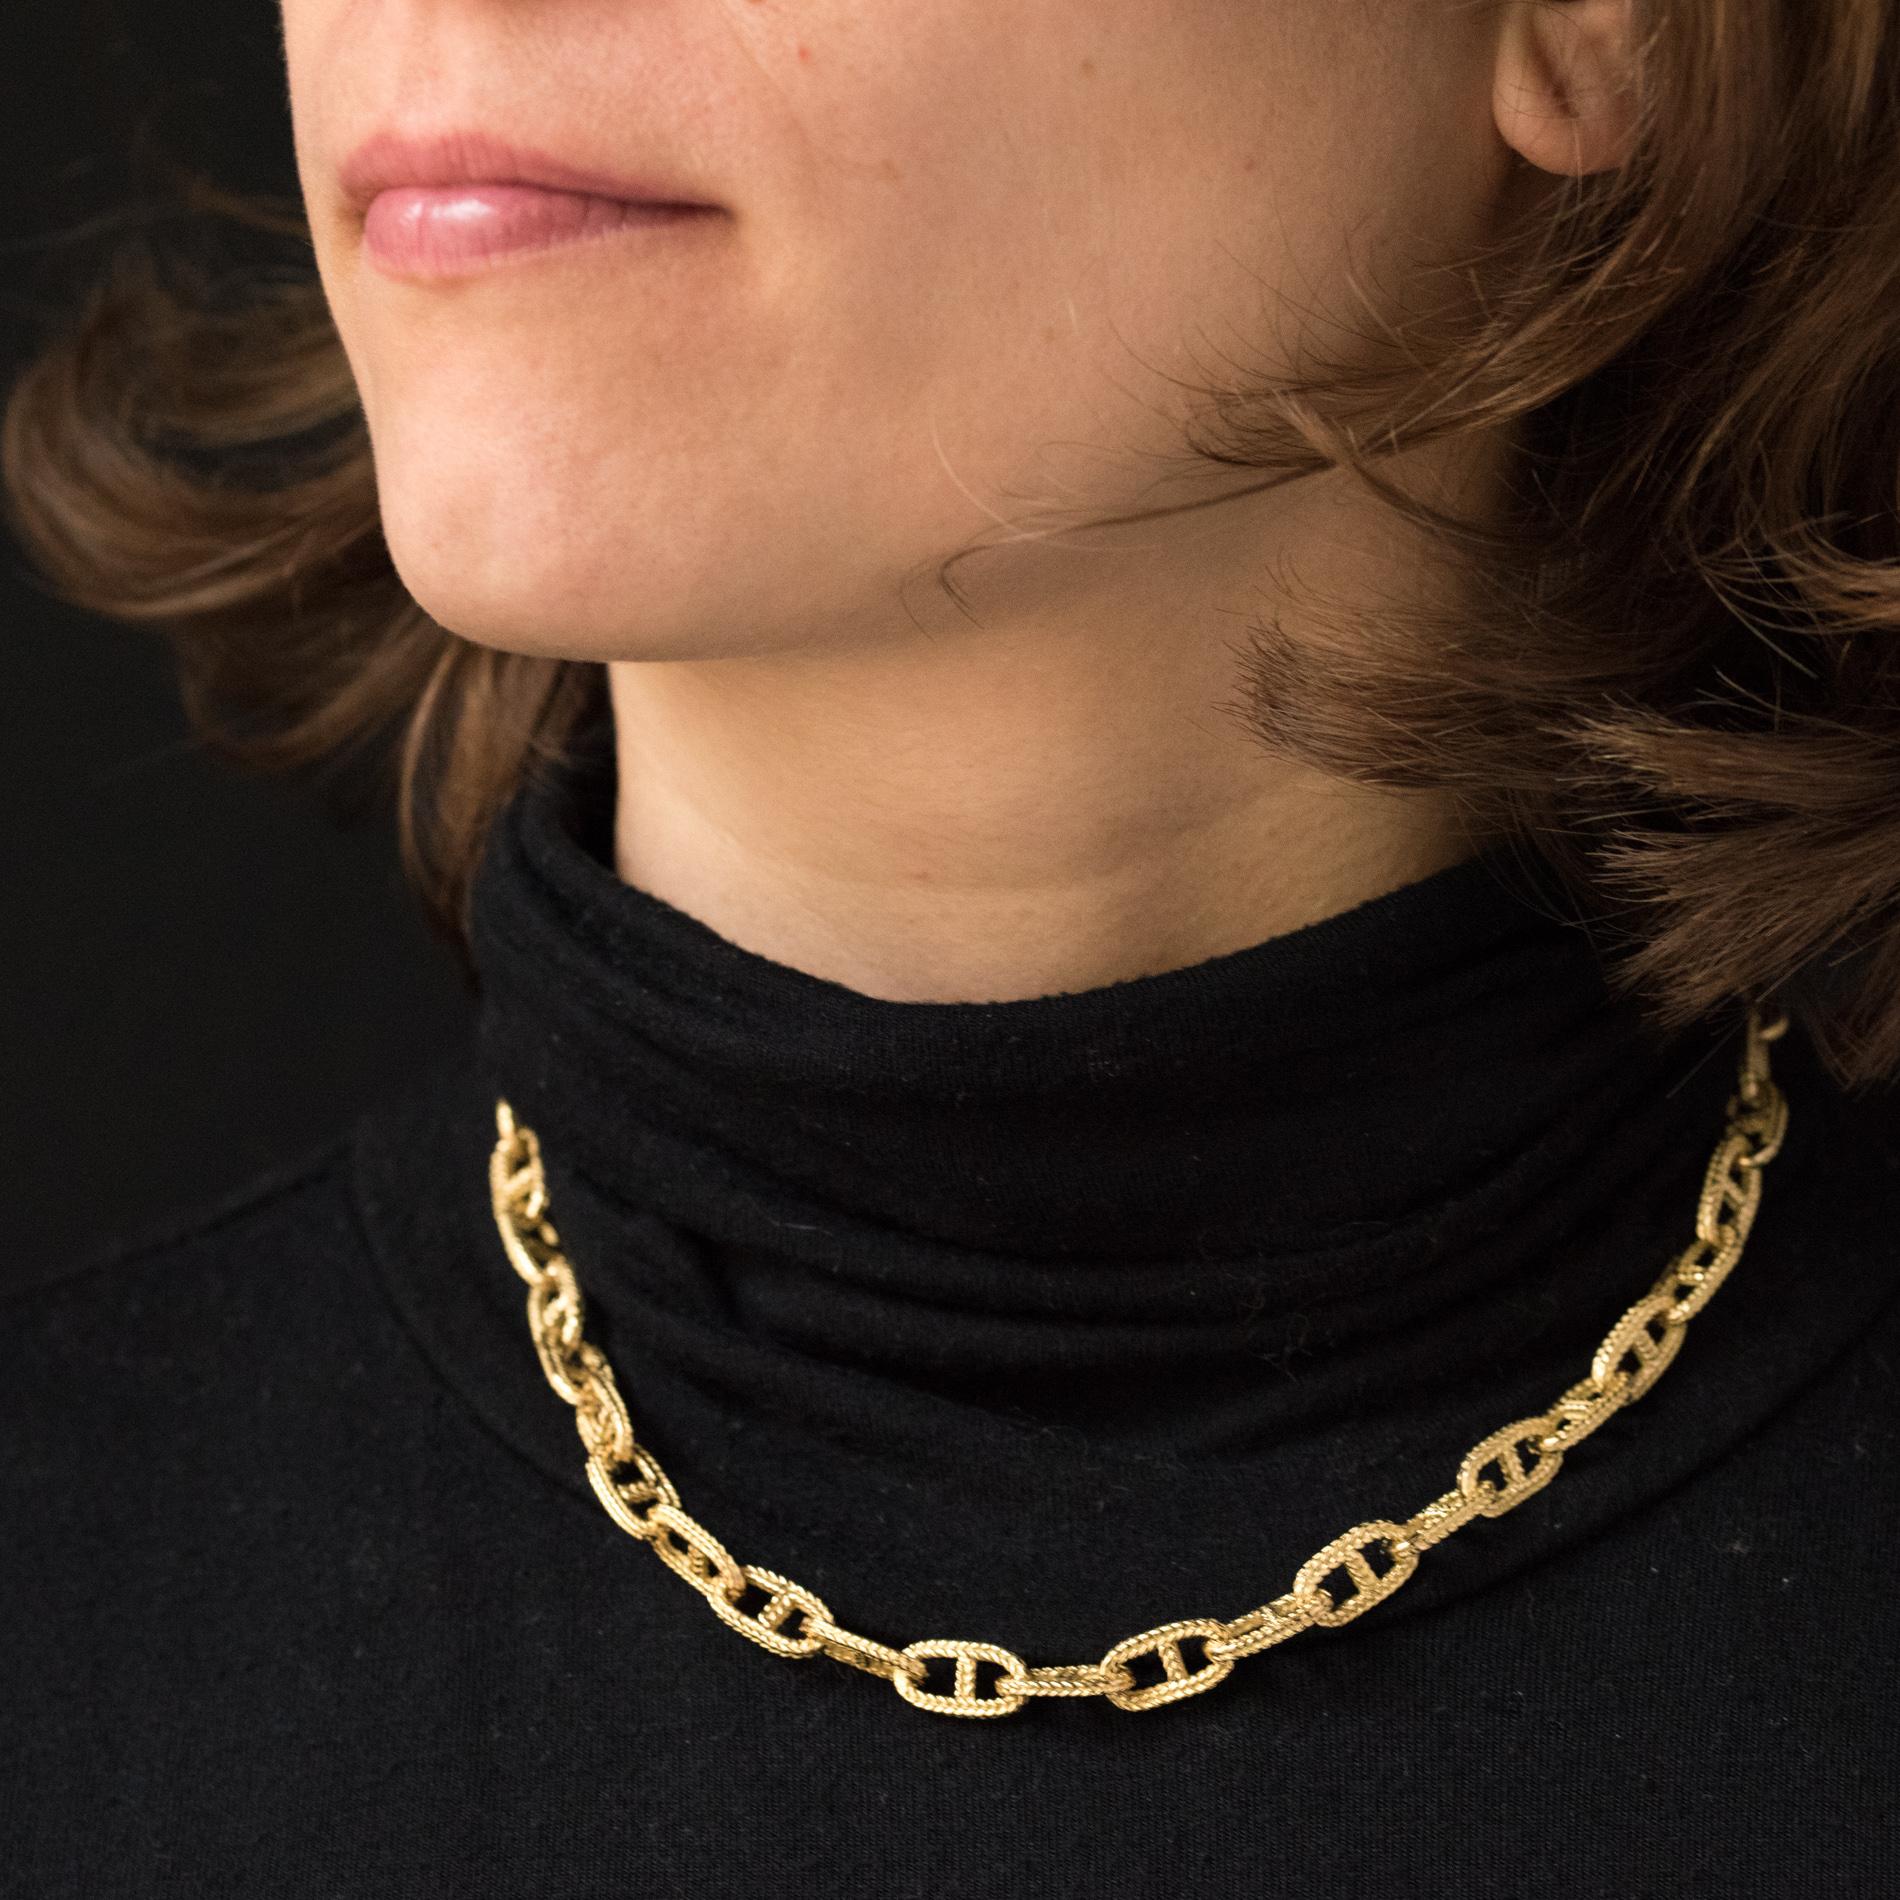 Necklace in 18 karats yellow gold, eagle's head hallmark.
This necklace is made of a massive chiseled navy mesh. The clasp is a ratchet ring with a safety 